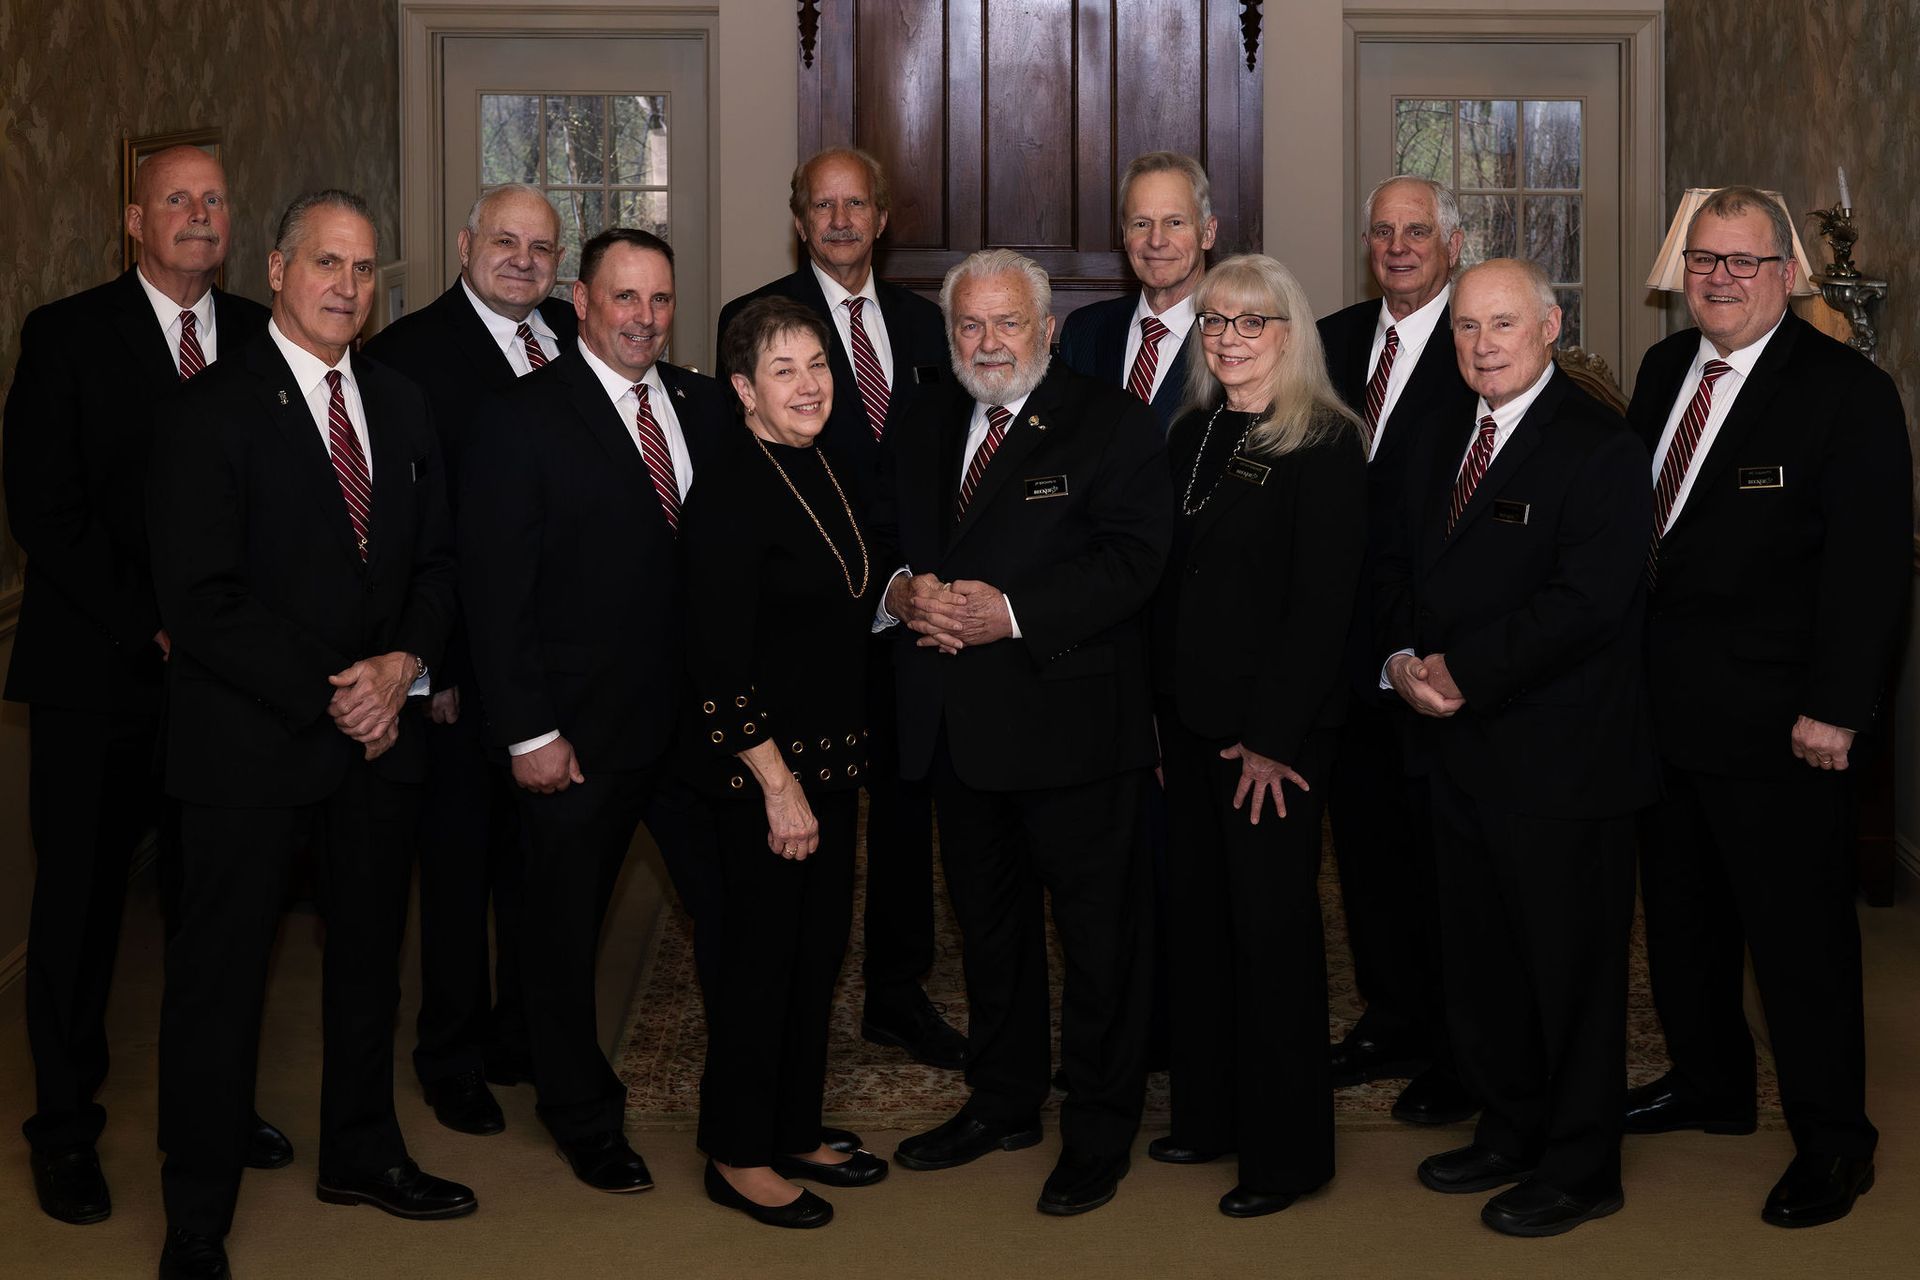 A group of people in suits and ties are posing for a picture.